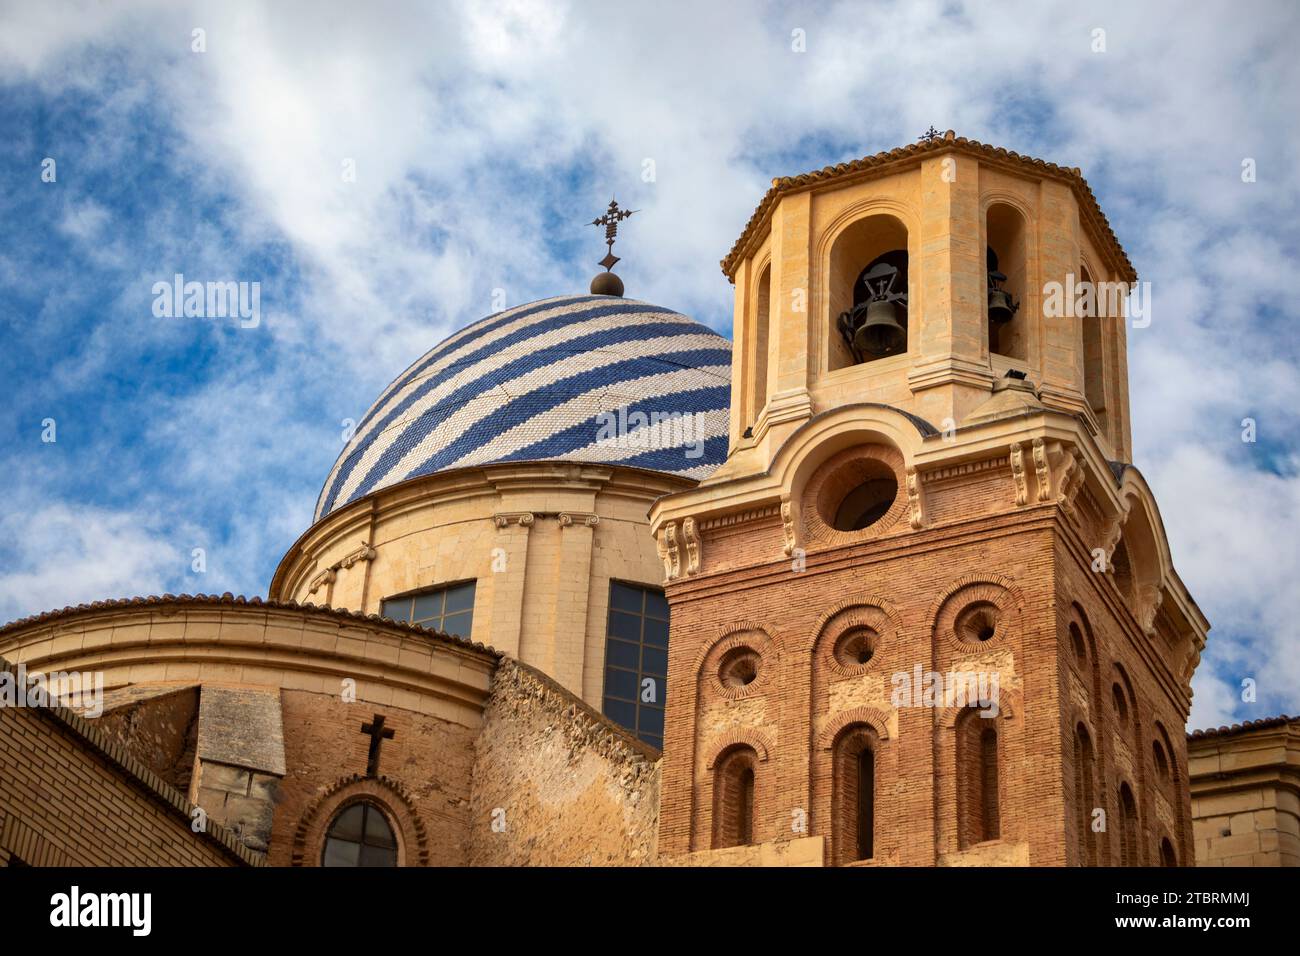 Detail of the tower and dome with blue and white stripes of the Basilica of the Pursima Concepcion in Yecla, Region of Murcia, Spain Stock Photo